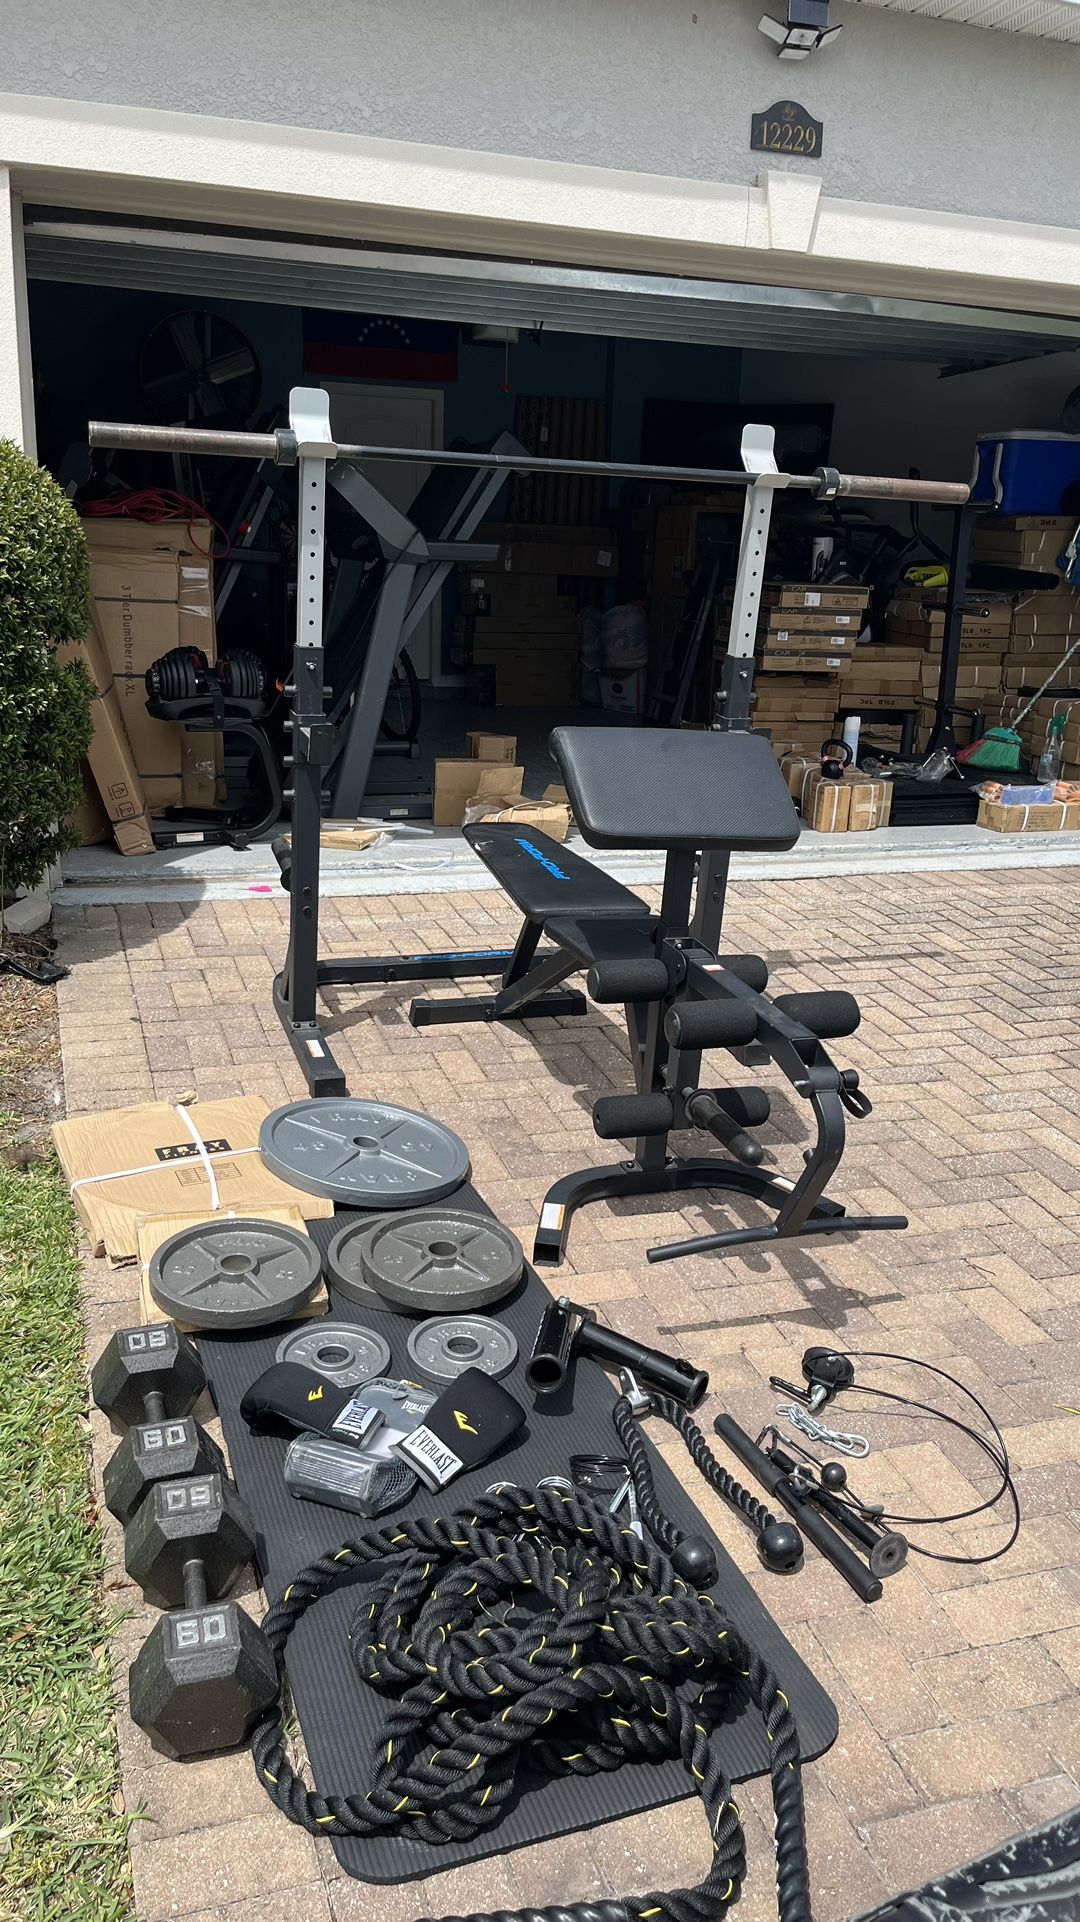 Home Gym Press Bench, Barbel witn Clips, 200 Lbs Plates Brand New, 120 Lbs Iron Dumbbells  and more